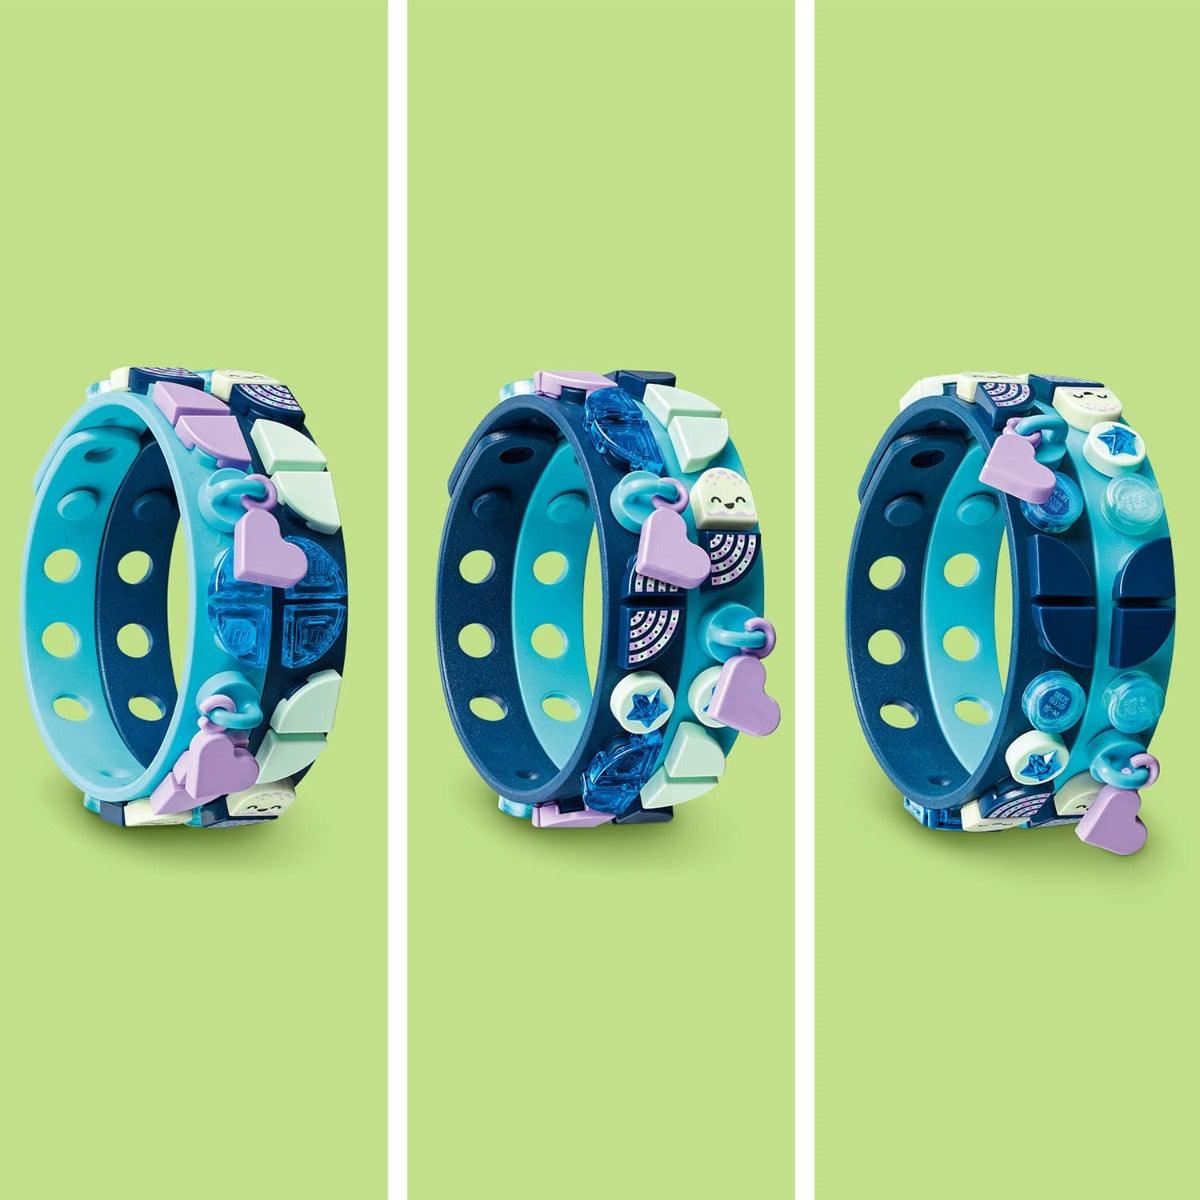 LEGO Dots Into The Deep Bracelets with Charms DIY Bracelet Kit for Ages 6+